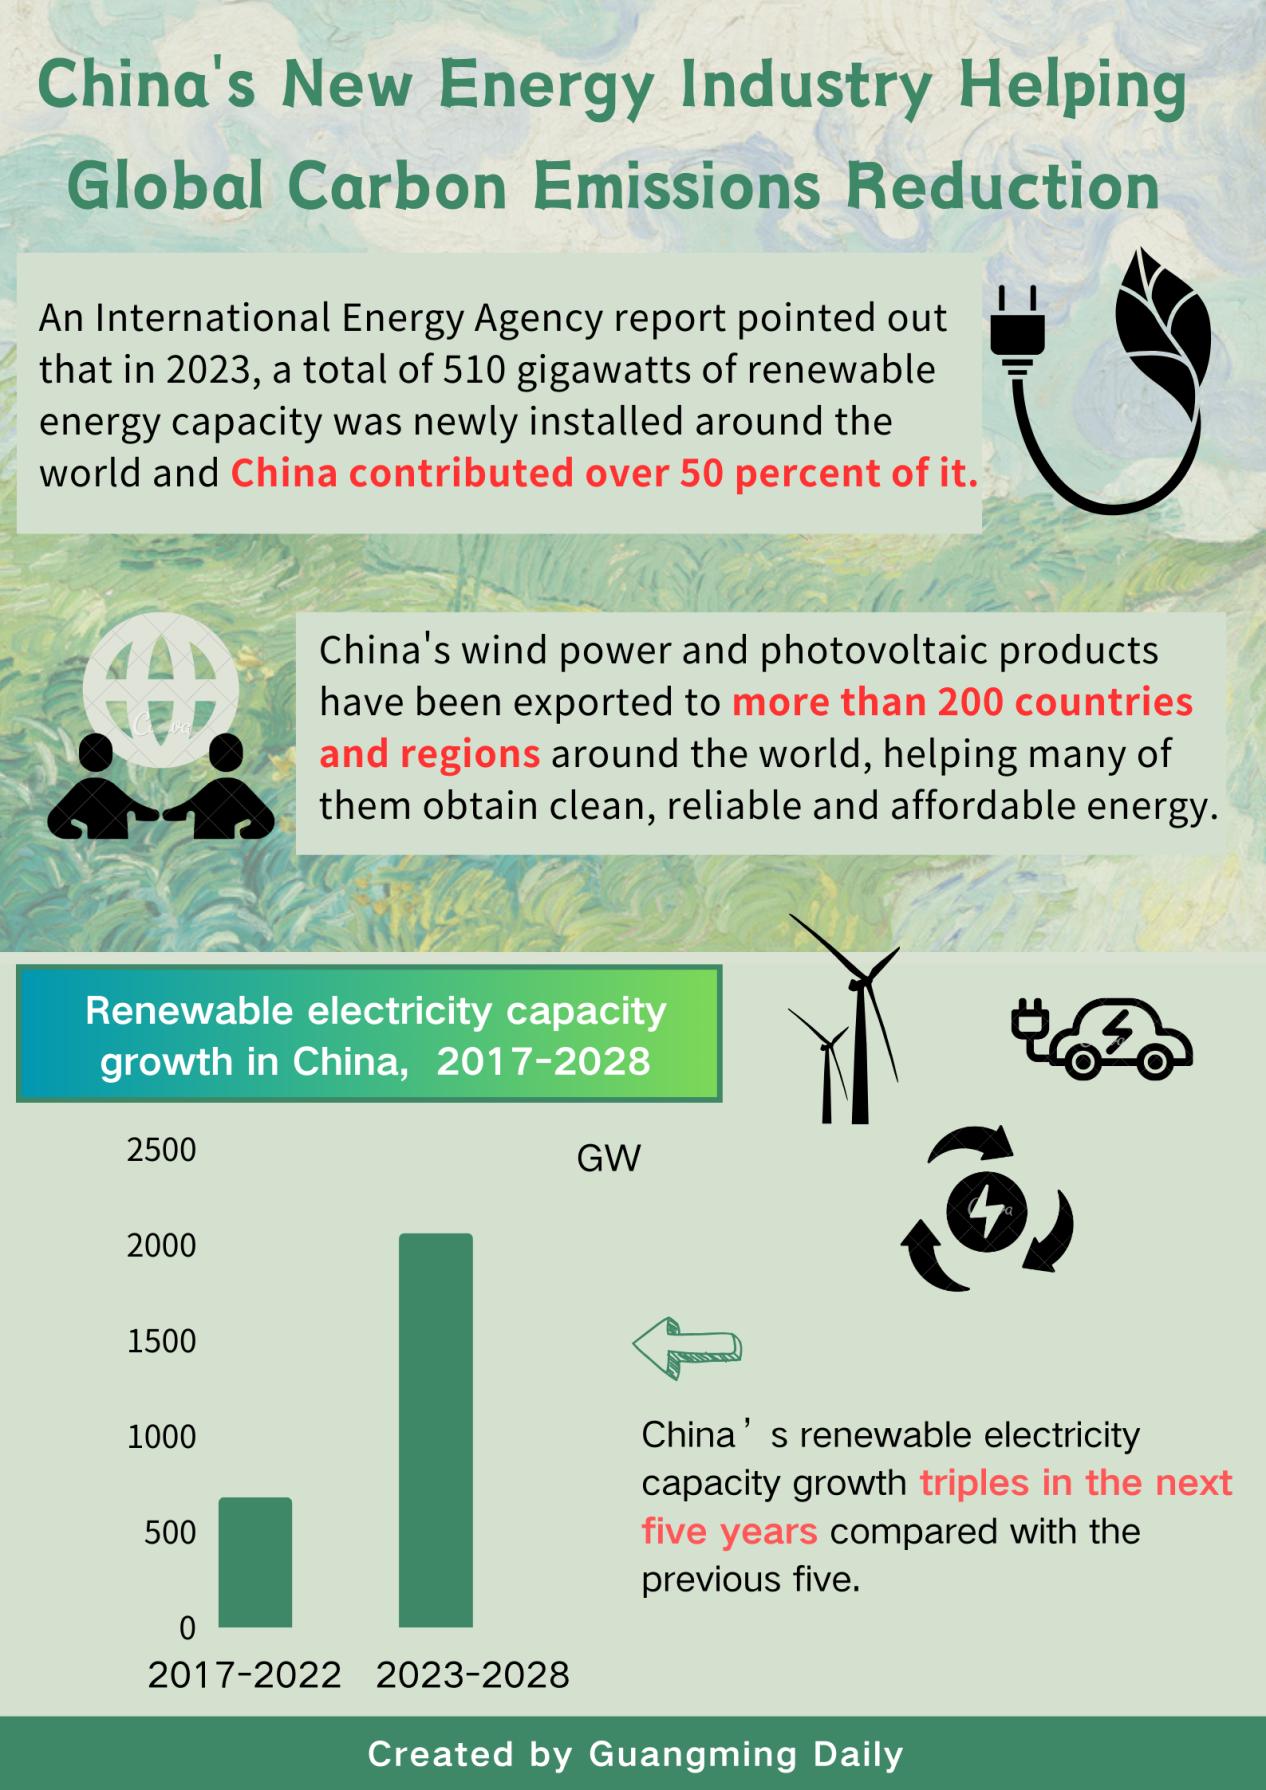 China's new energy industry helping global carbon emissions reduction